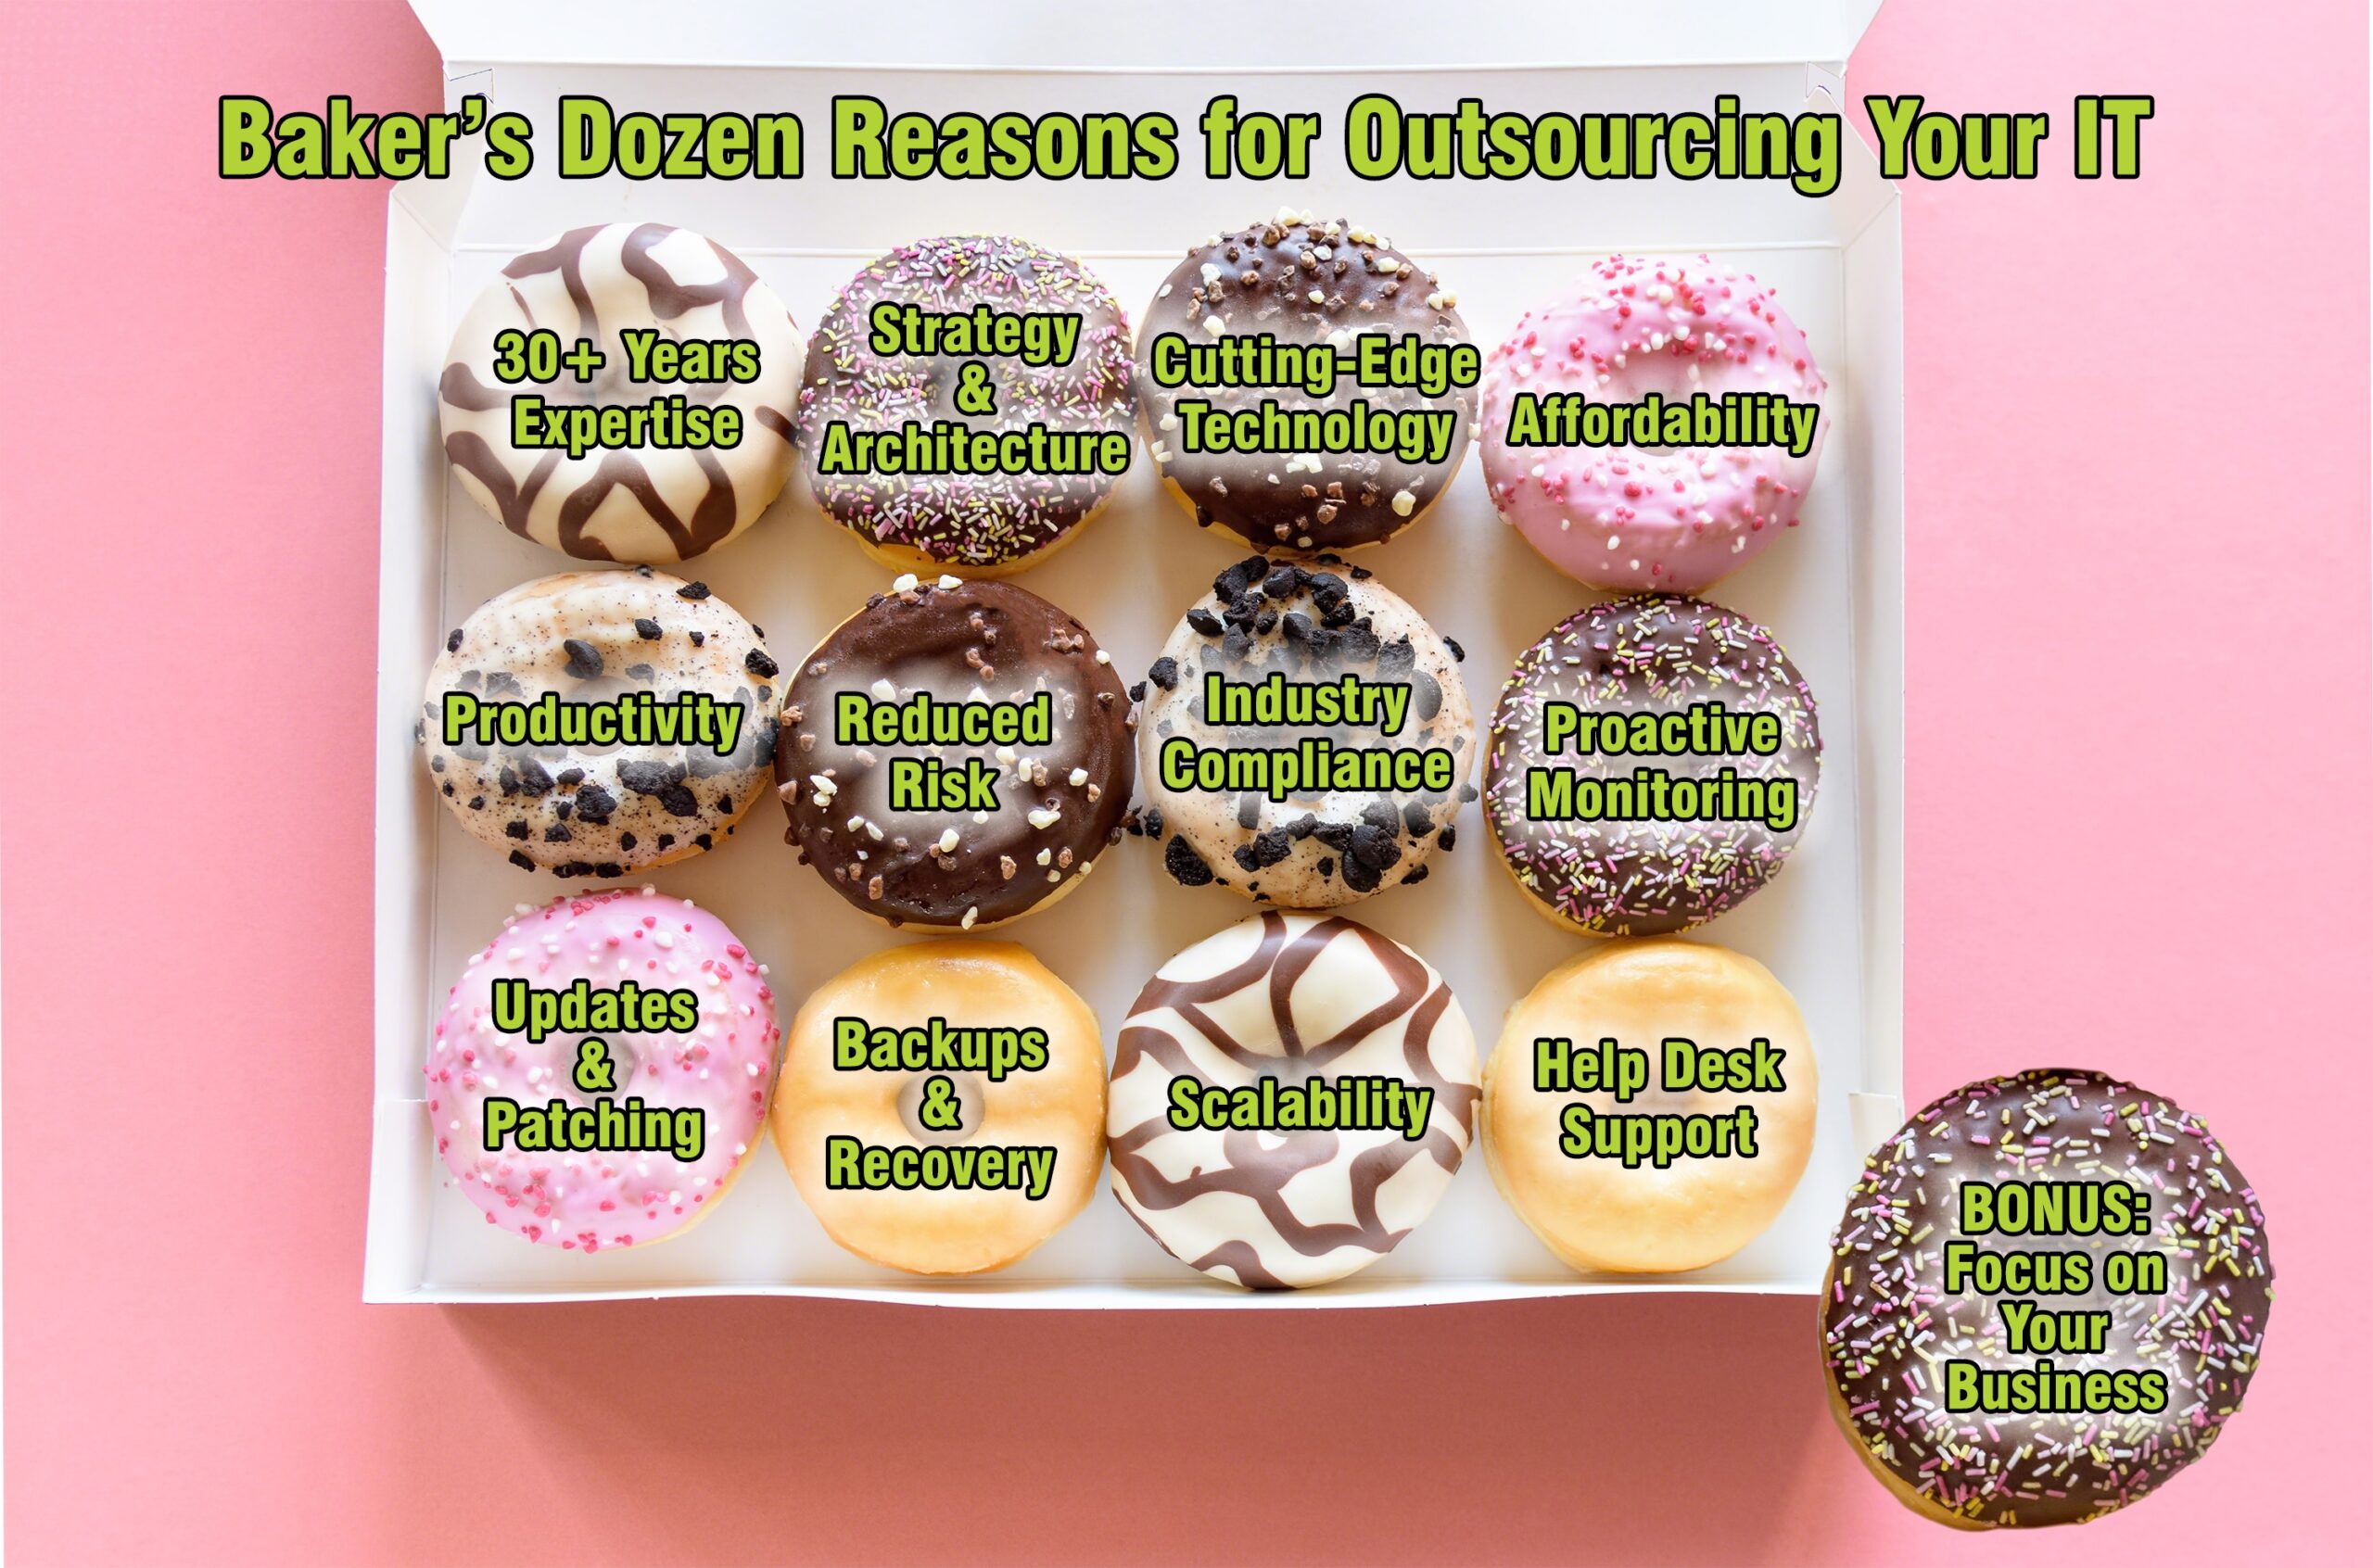 A Baker’s Dozen Reasons for Outsourcing Your IT